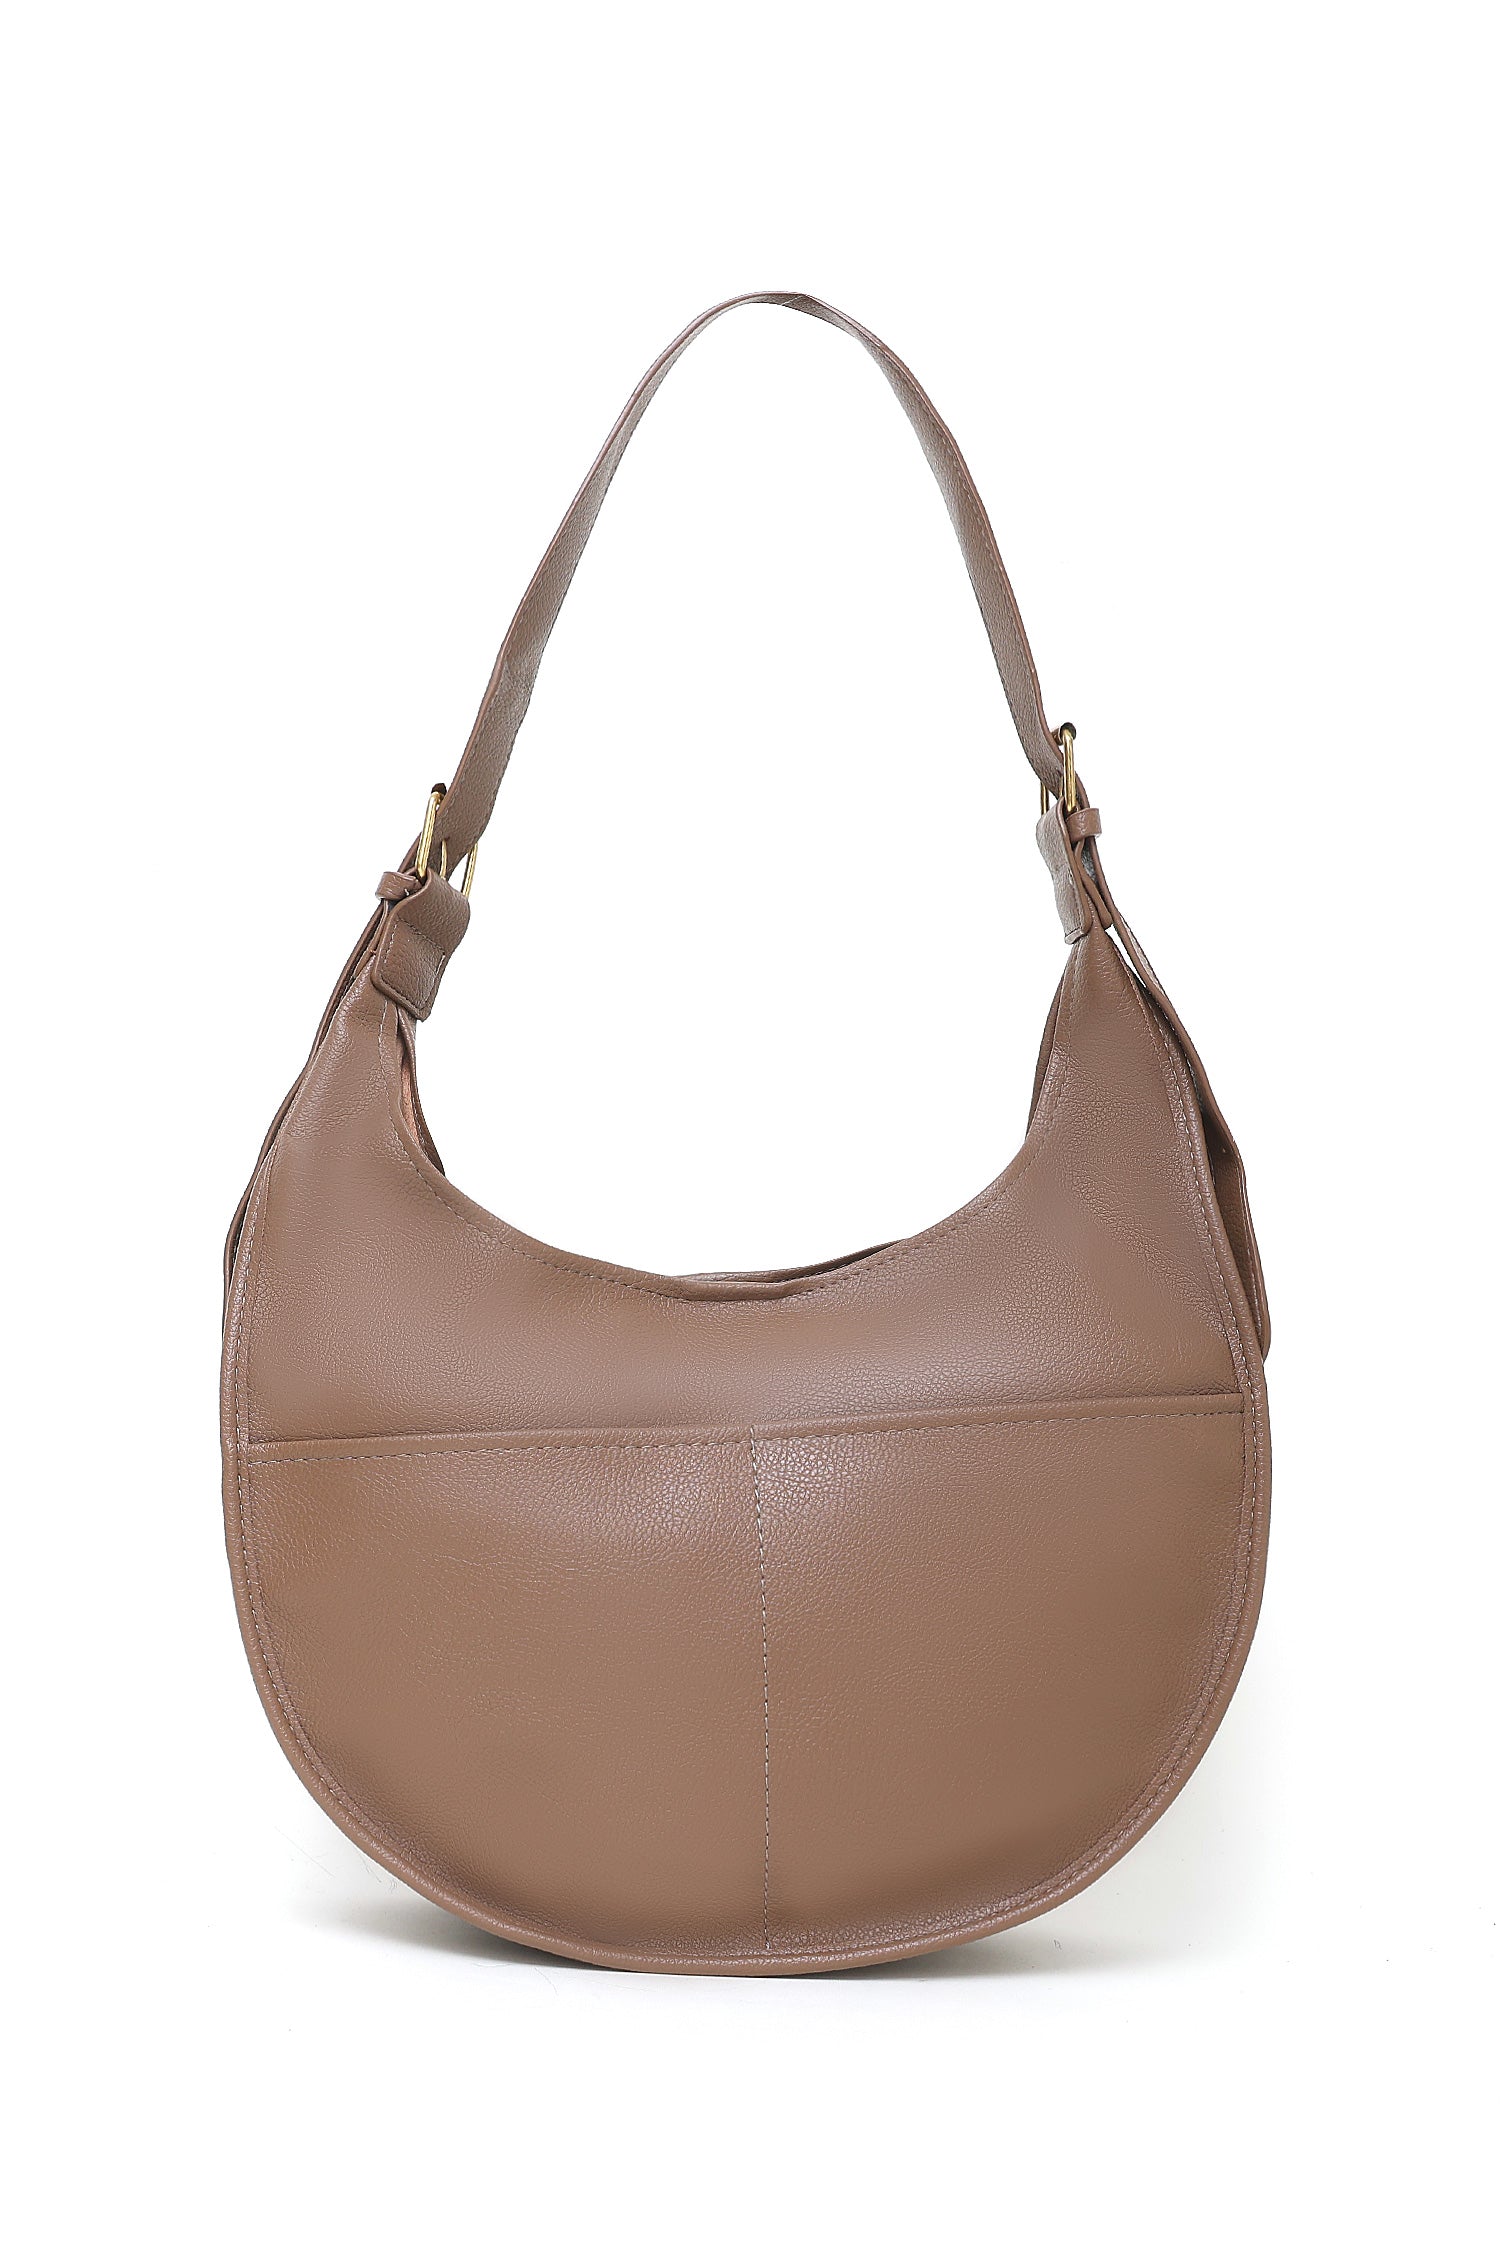 LEATHER BAG-CLAY